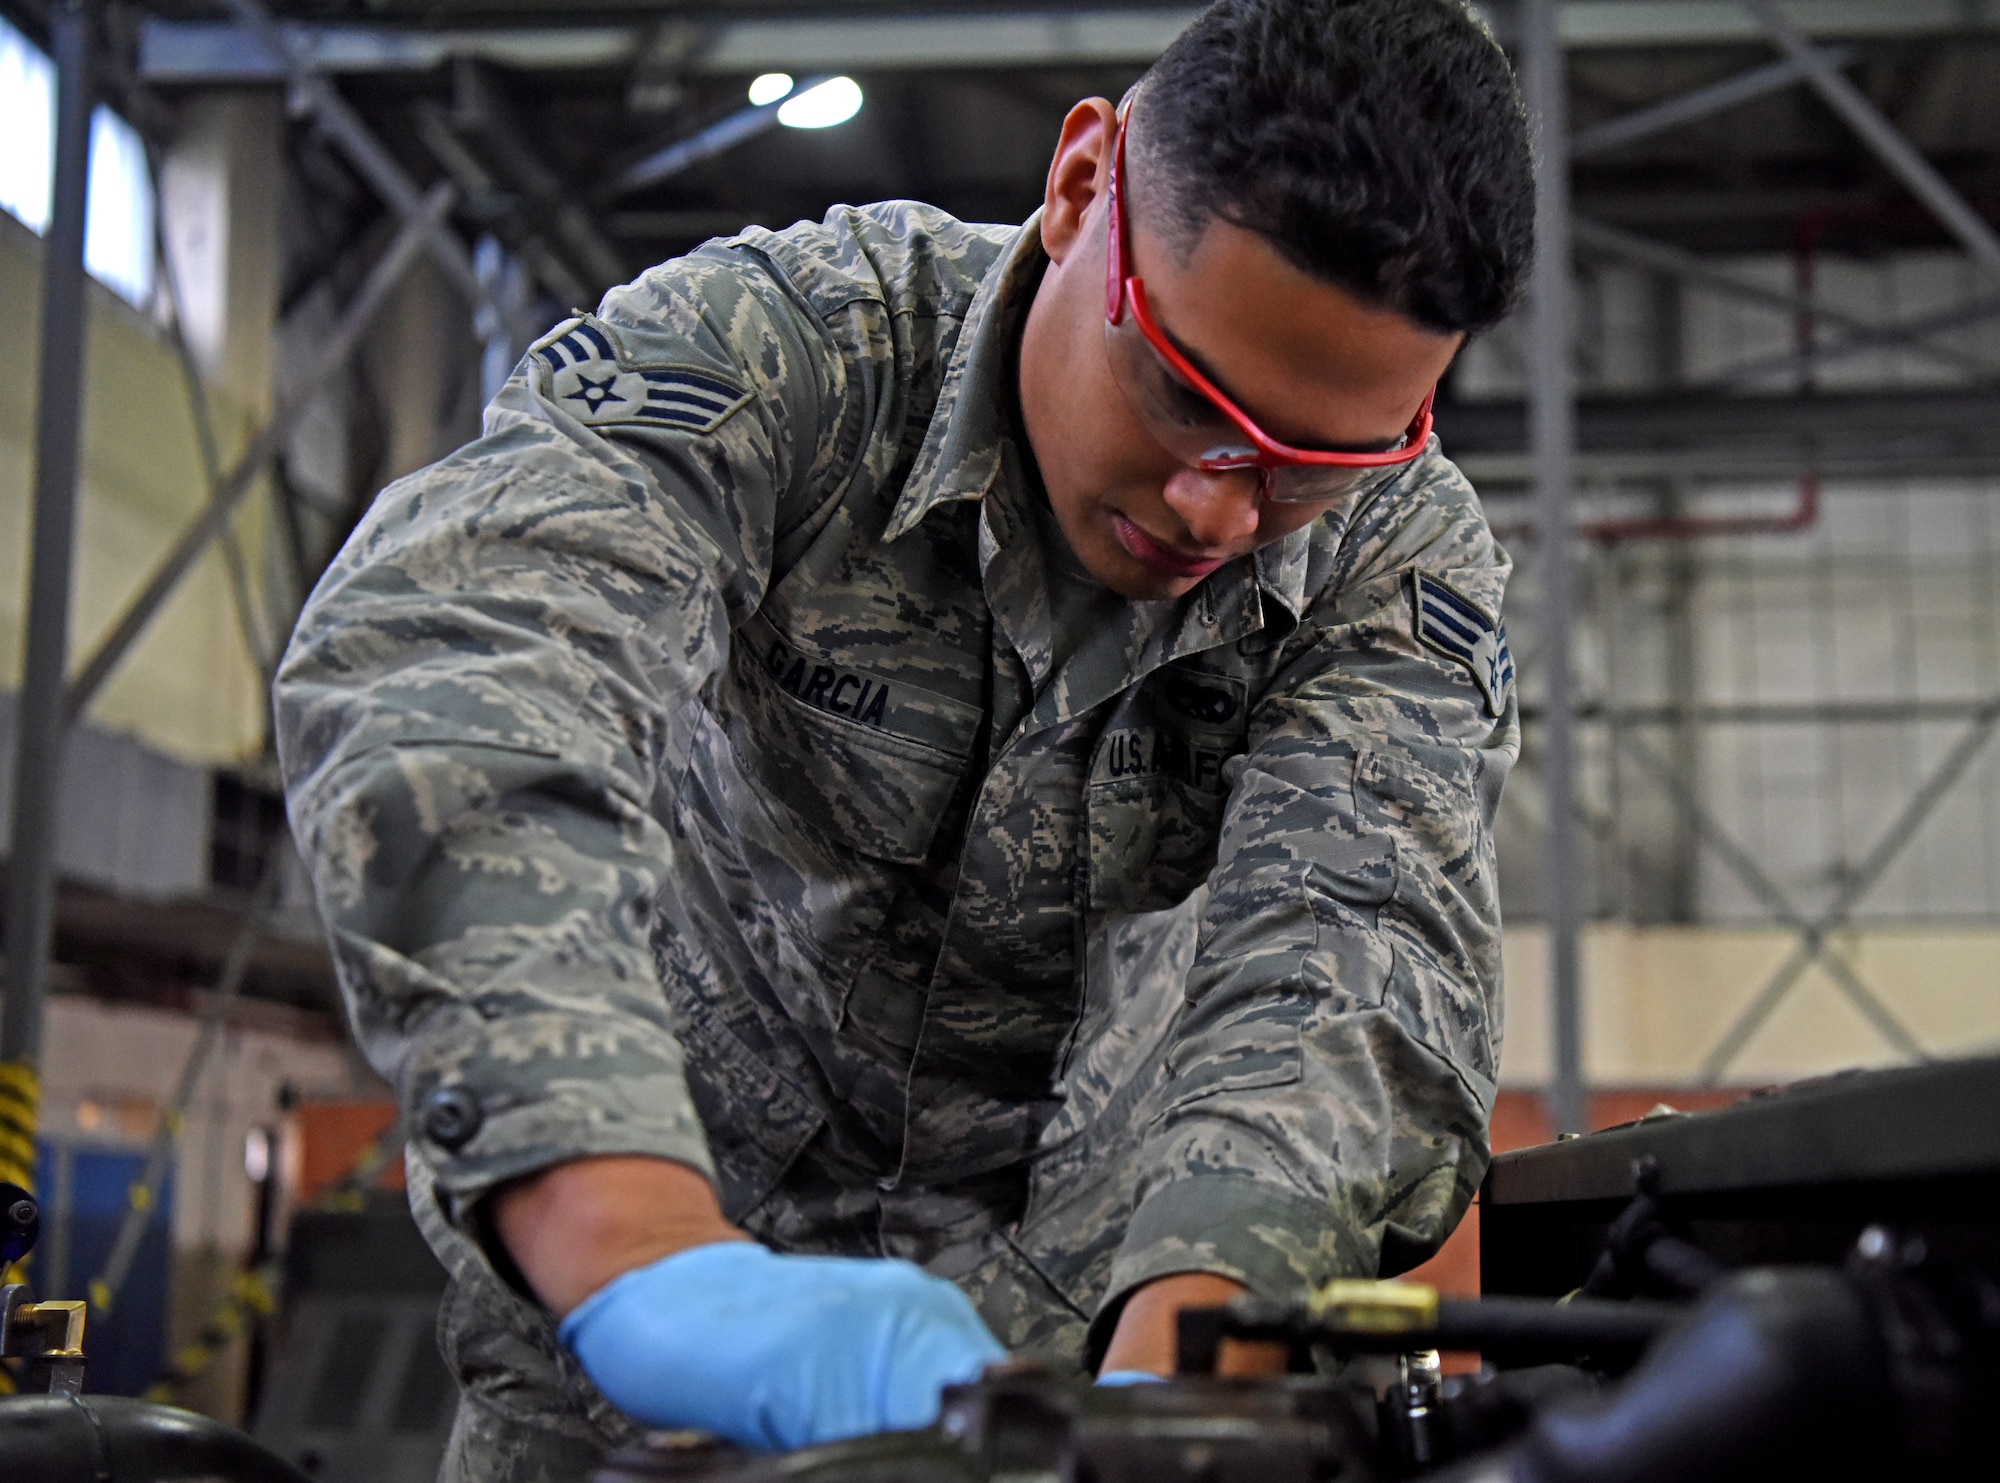 Senior Airman Antonio Garcia, 100th Maintenance Squadron aerospace ground equipment technician, repairs a ground power unit engine at RAF Mildenhall, England, Oct. 23, 2019. Repairs, updates and inspections are conducted on aerospace ground equipment to ensure everything is in proper working order. (U.S. Air Force photo by Senior Airman Brandon Esau)